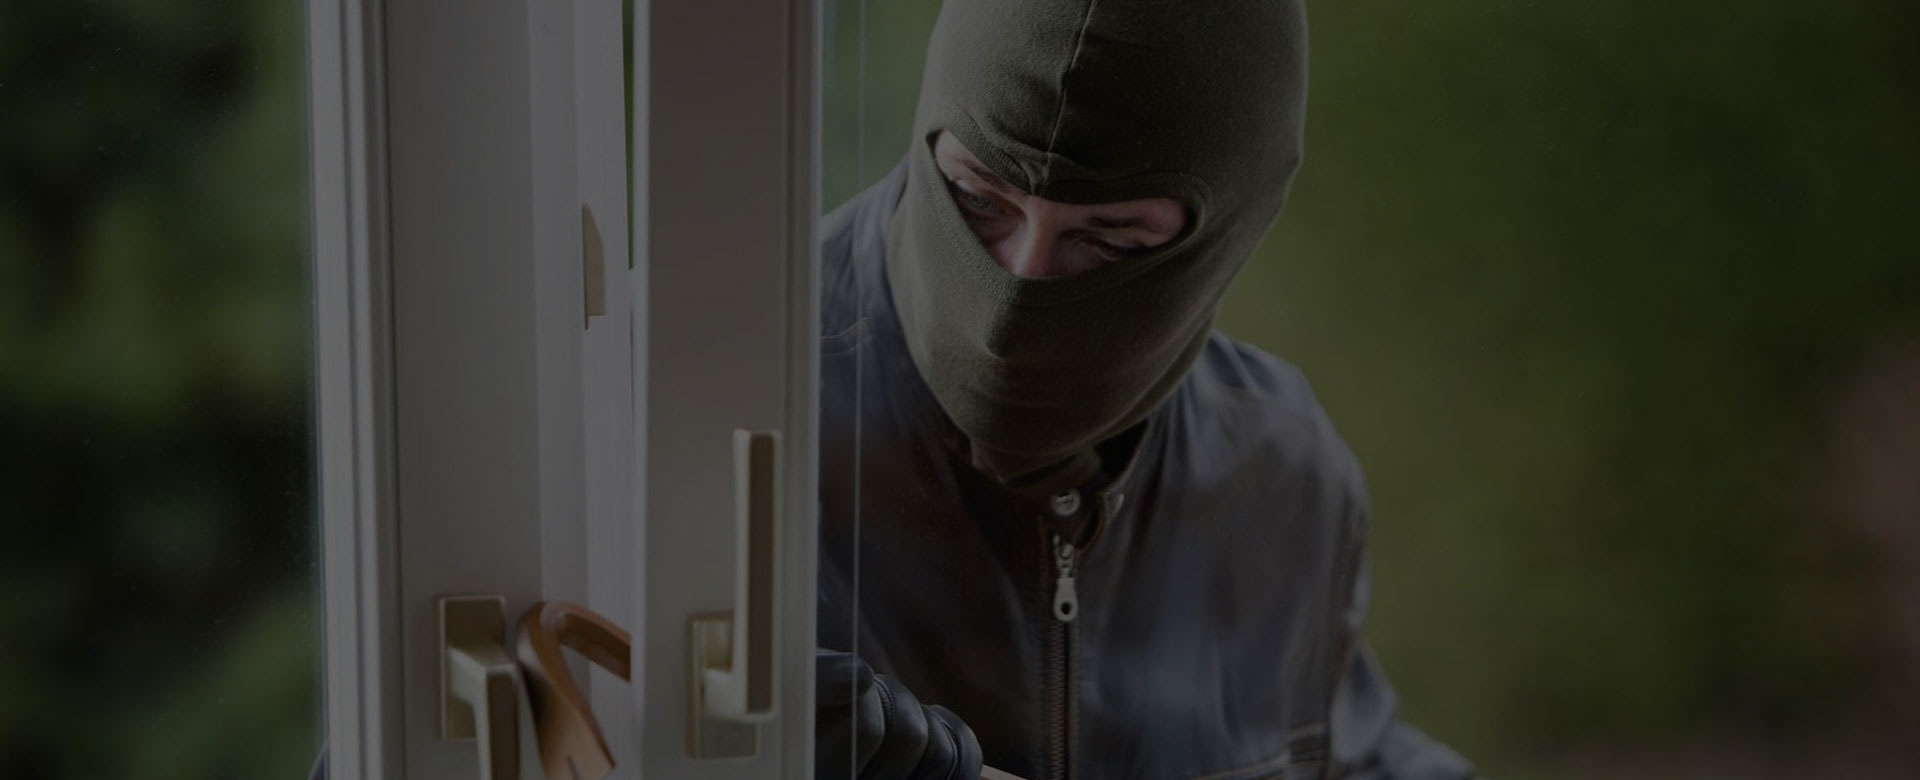 PROTECTING YOUR HOME OR BUSINESS